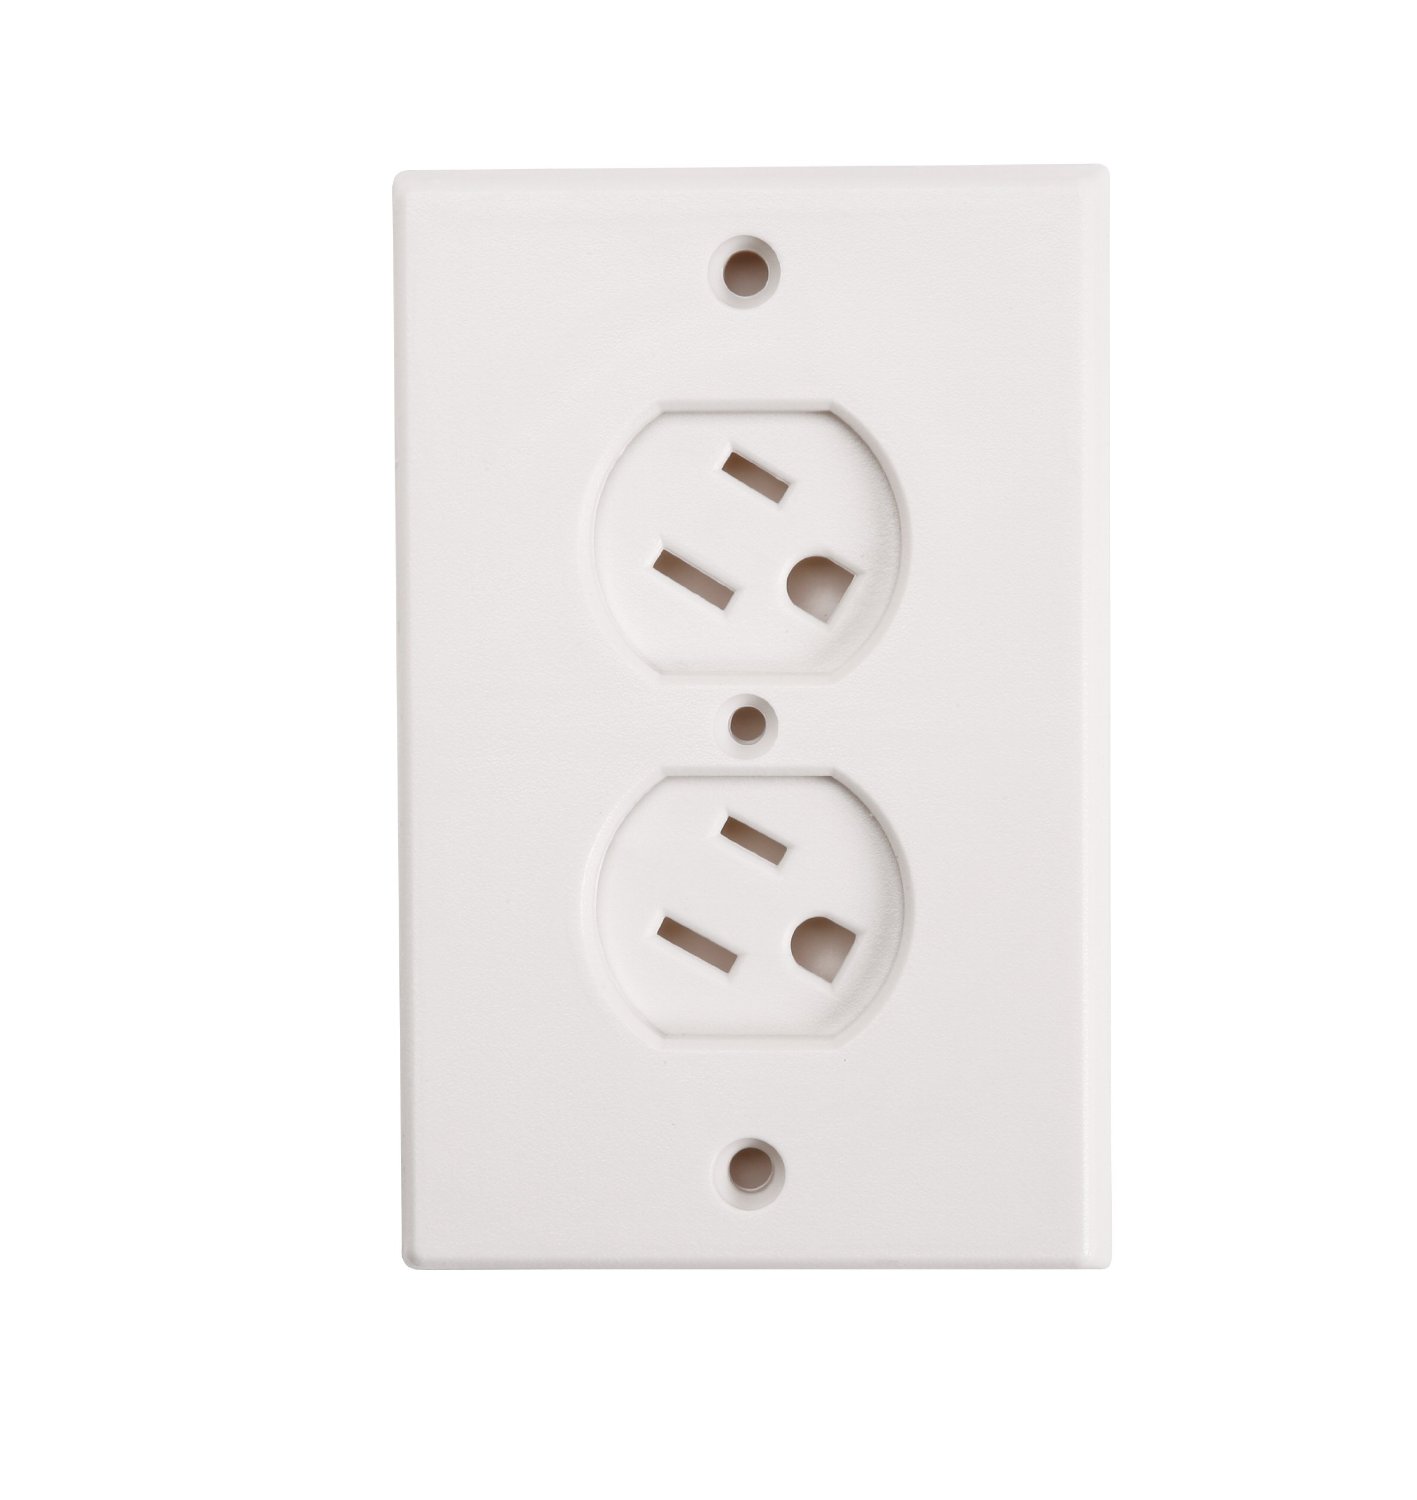 SAFETY FIRST SWIVEL OUTLET COVER